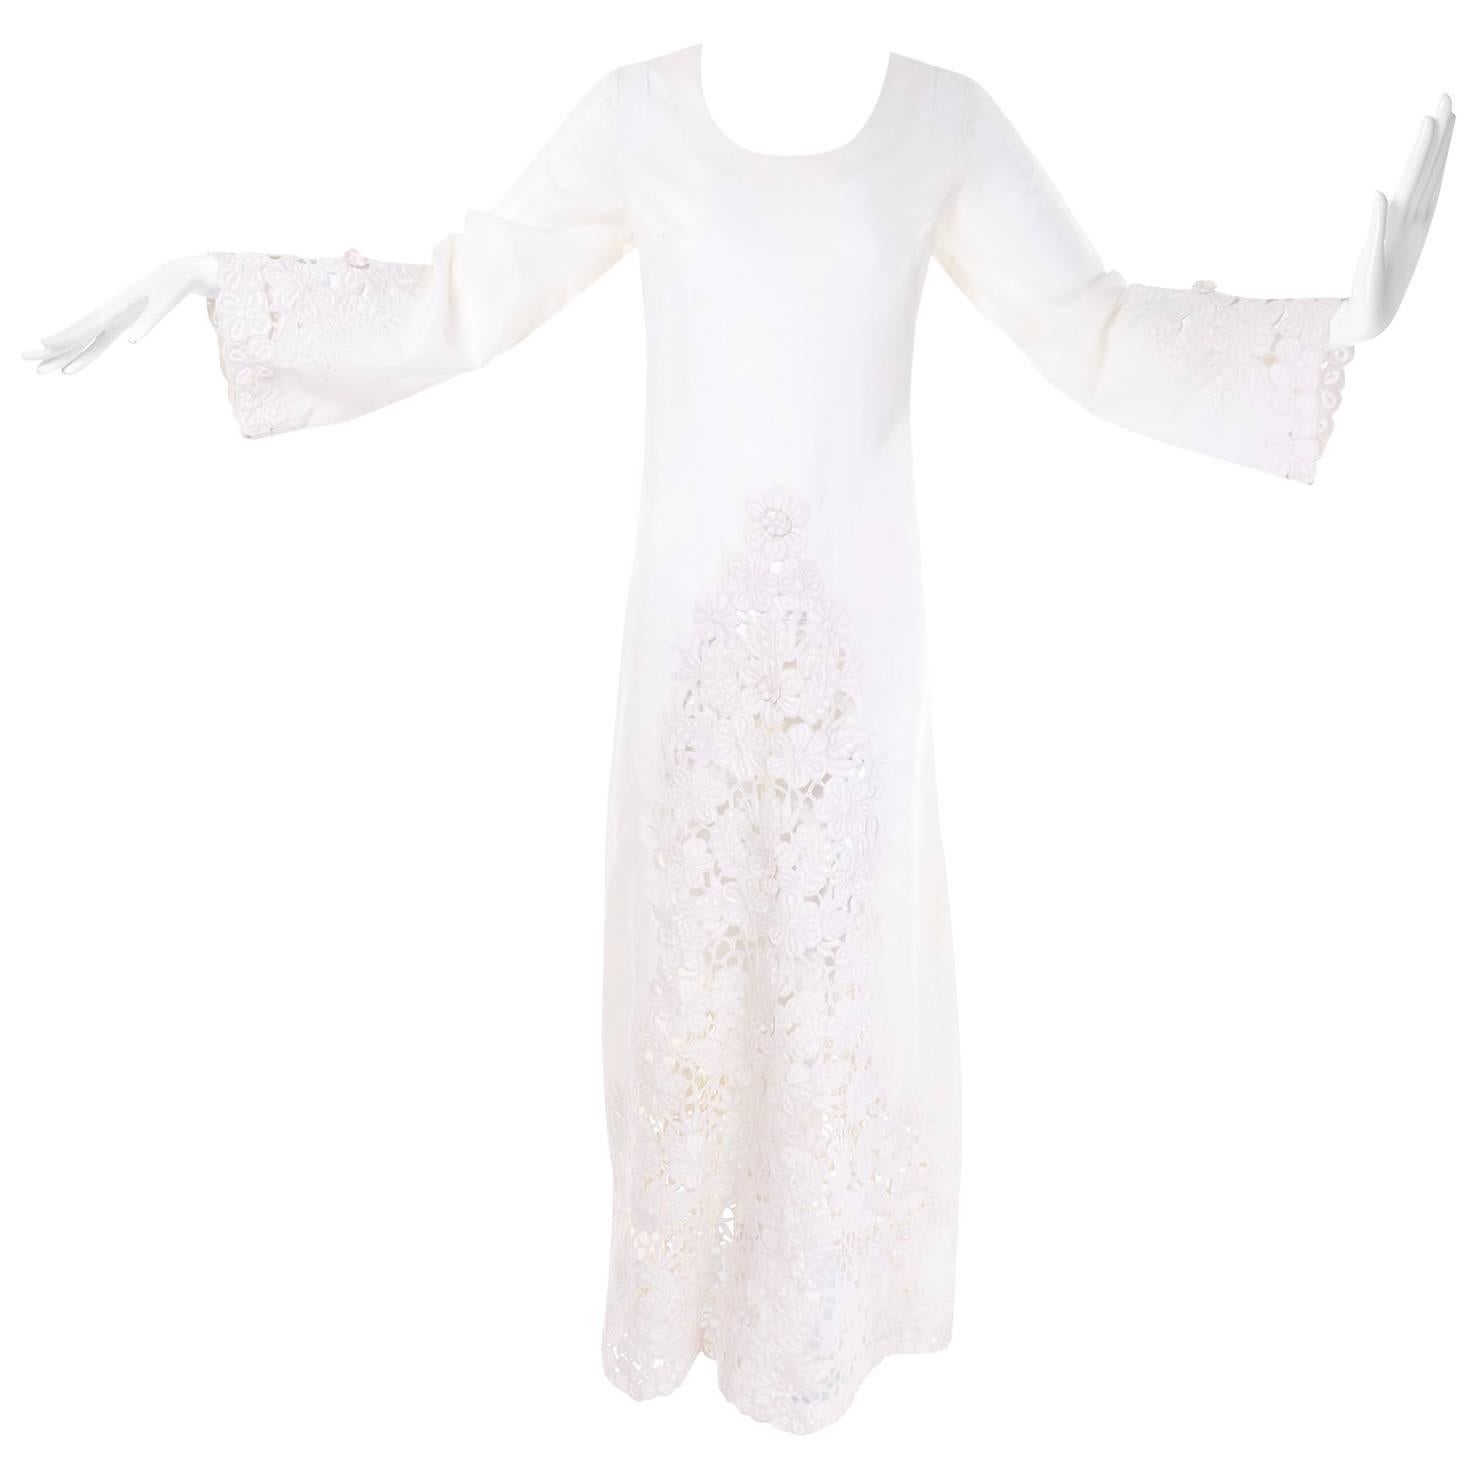 Shangri La Hotel Singapore Vintage Dress or Wedding Gown With Guipure Lace